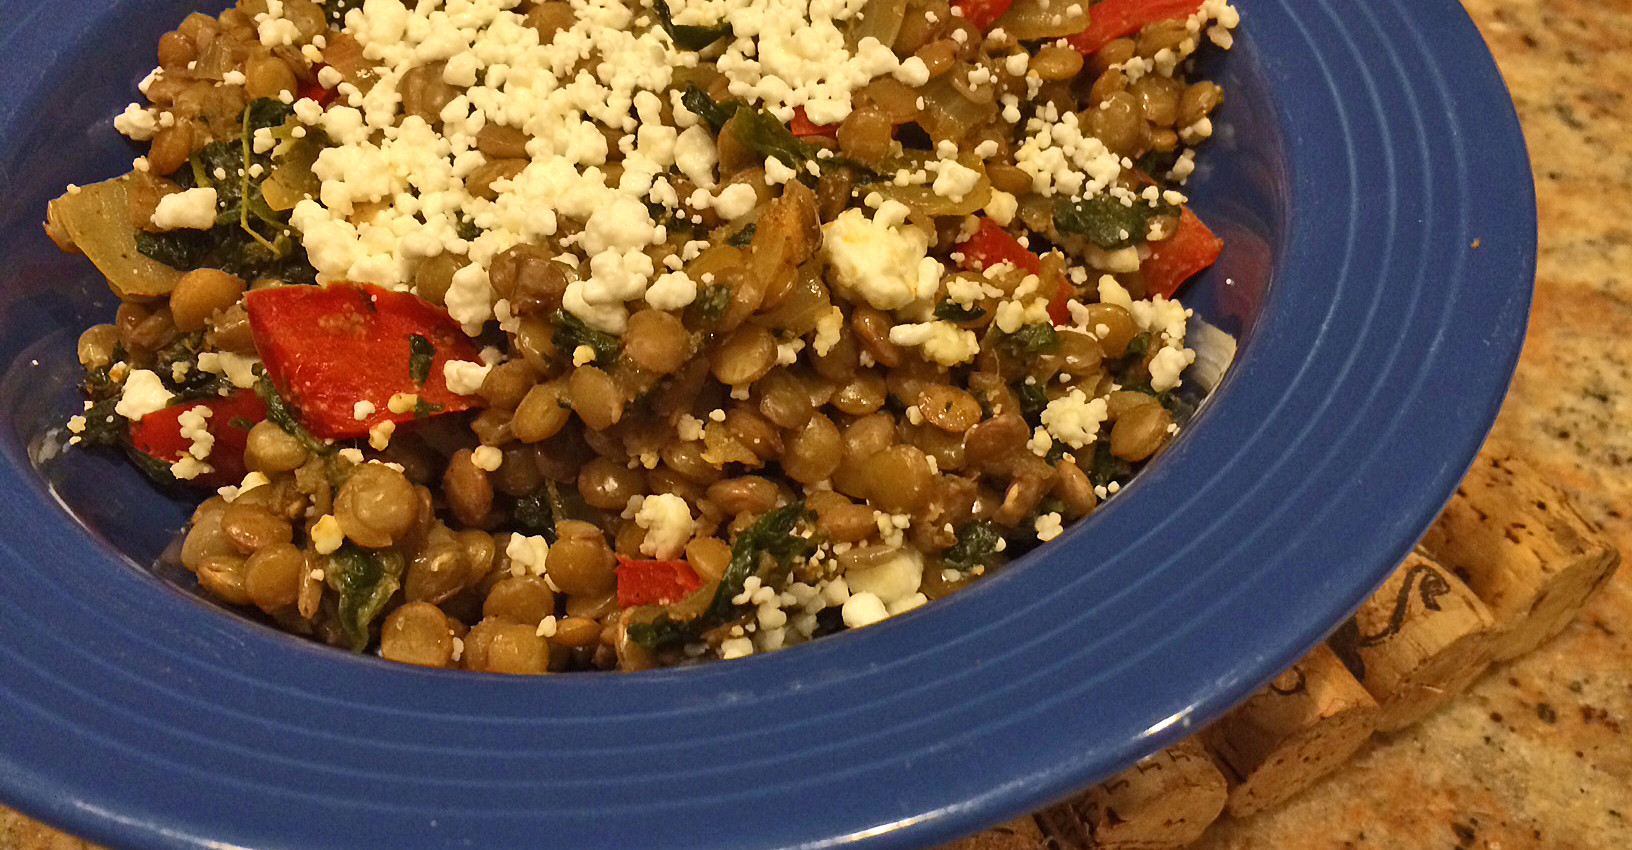 Lentil casserole with goat cheese, tomatoes, and spinach.